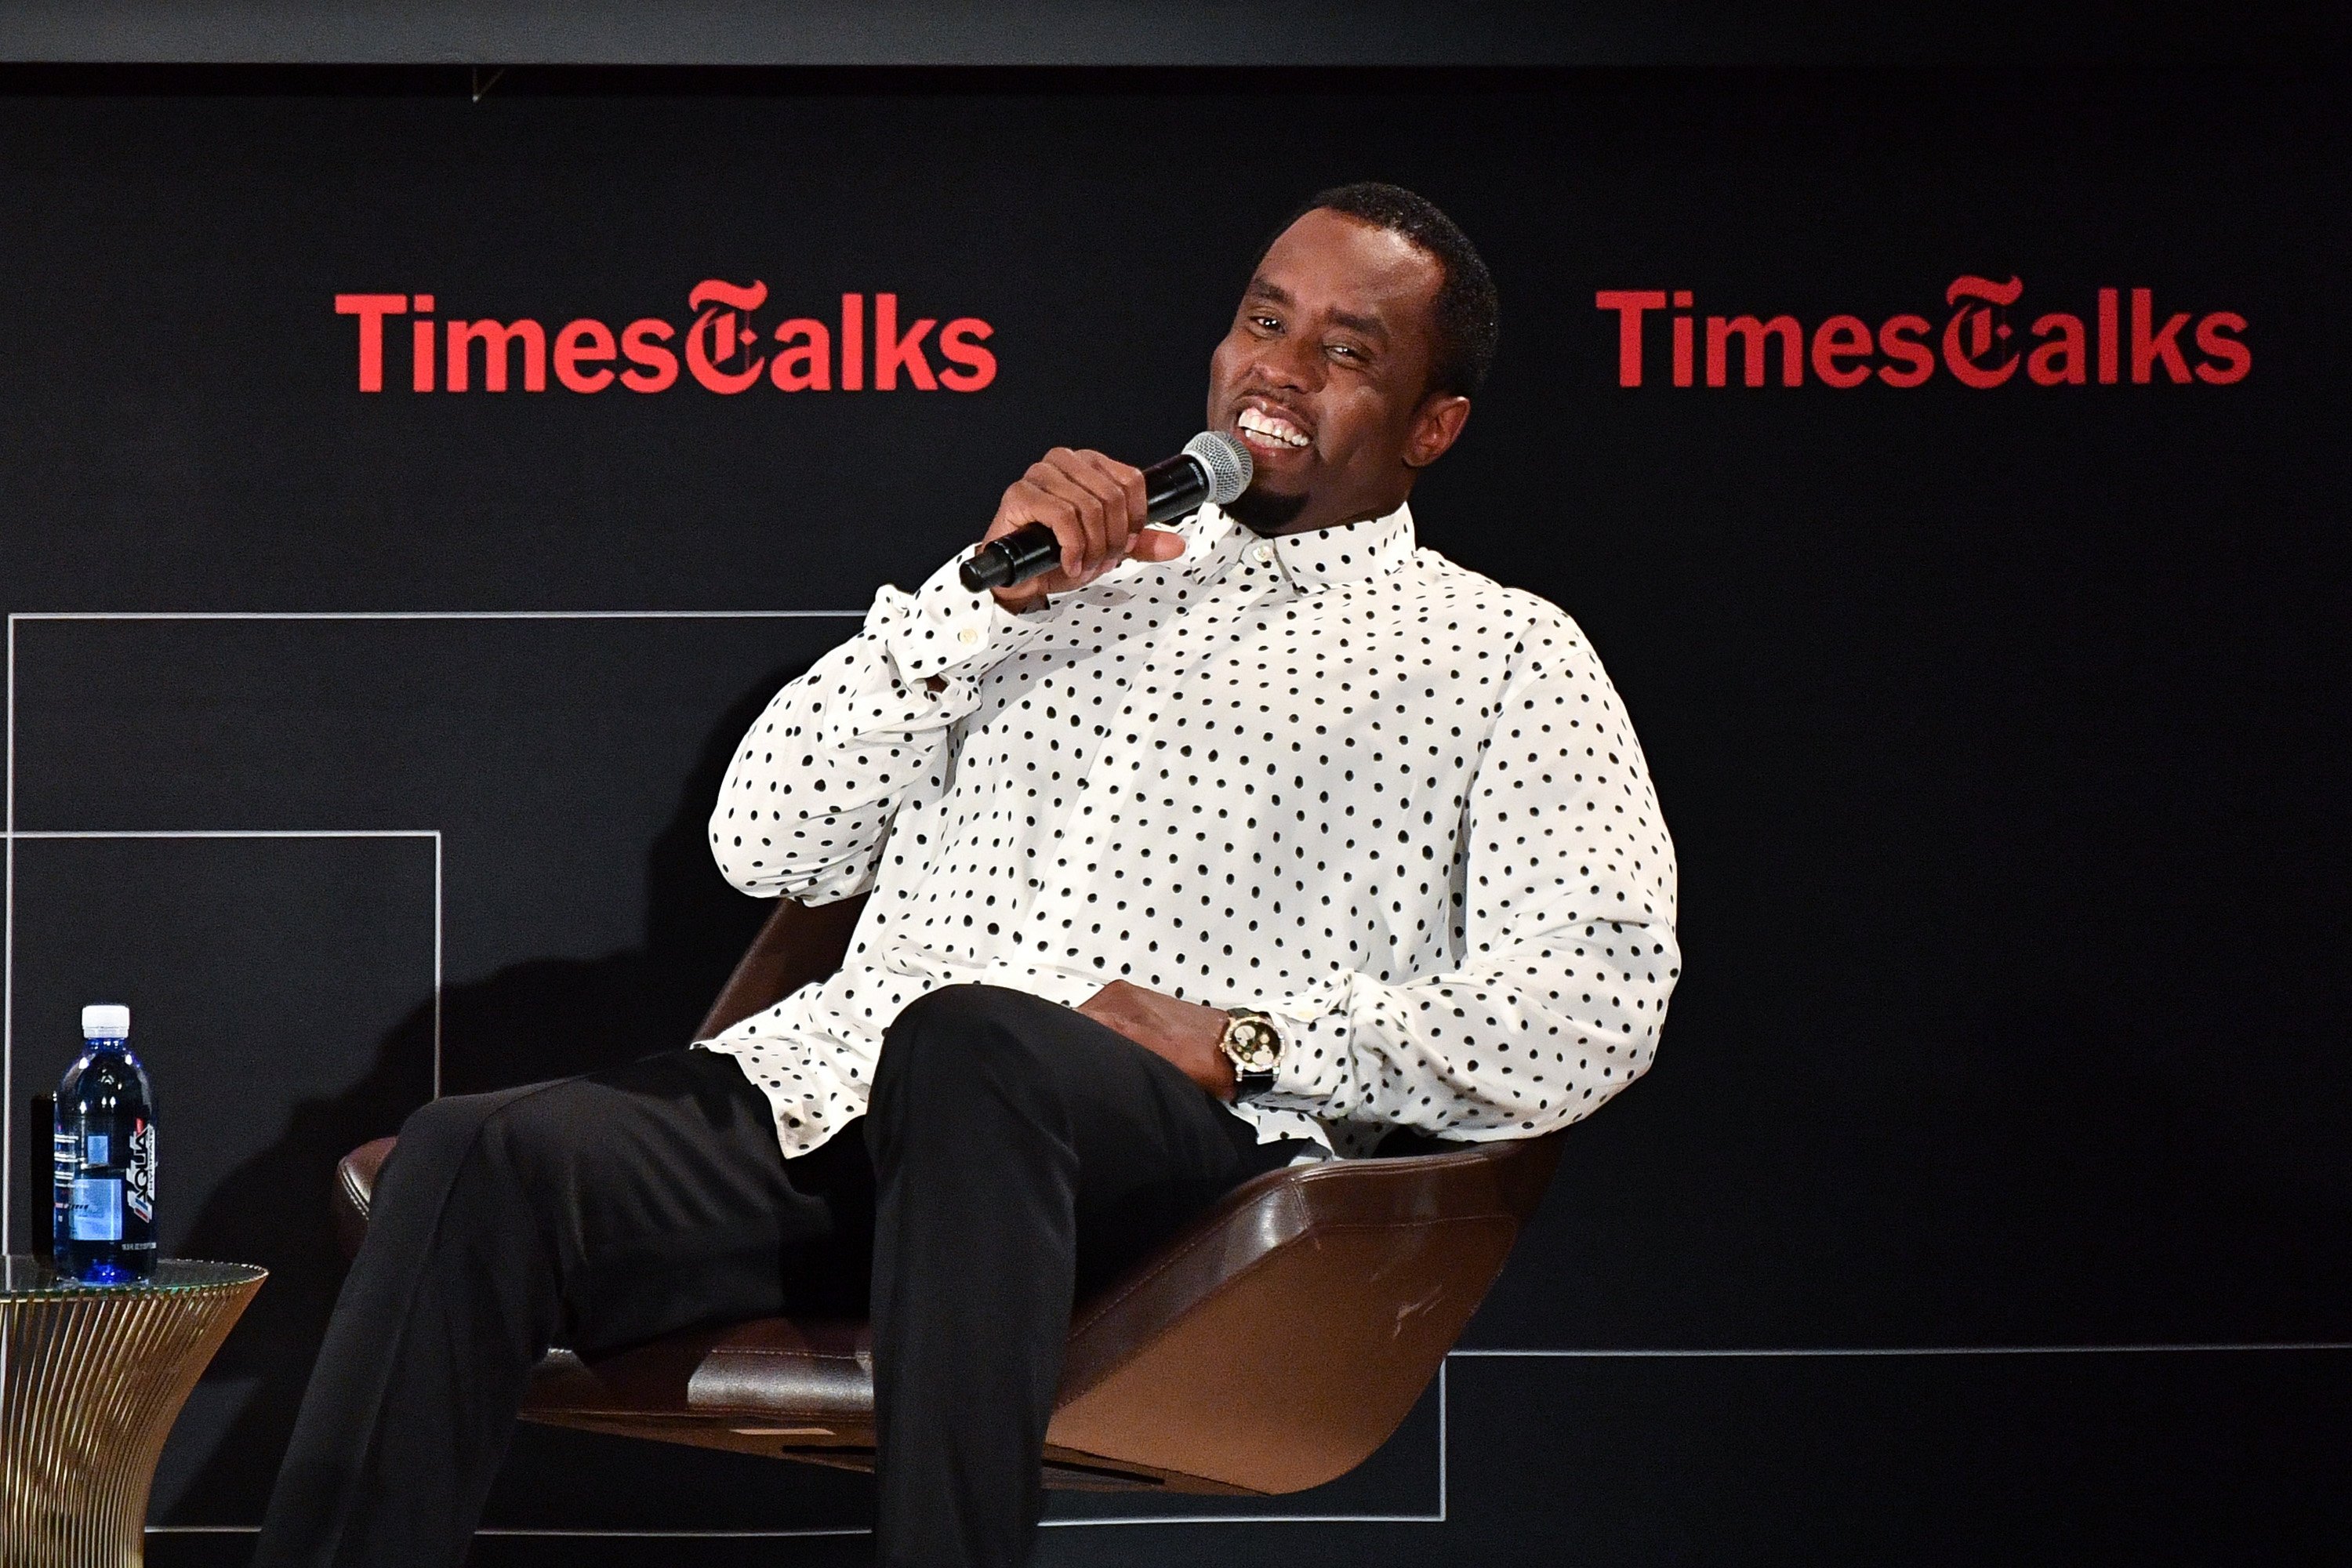 Sean "Diddy" Combs at TimesTalks Presents: An Evening with Sean "Diddy" Combs on Sept. 20, 2017 in New York City | Photo: Getty Images